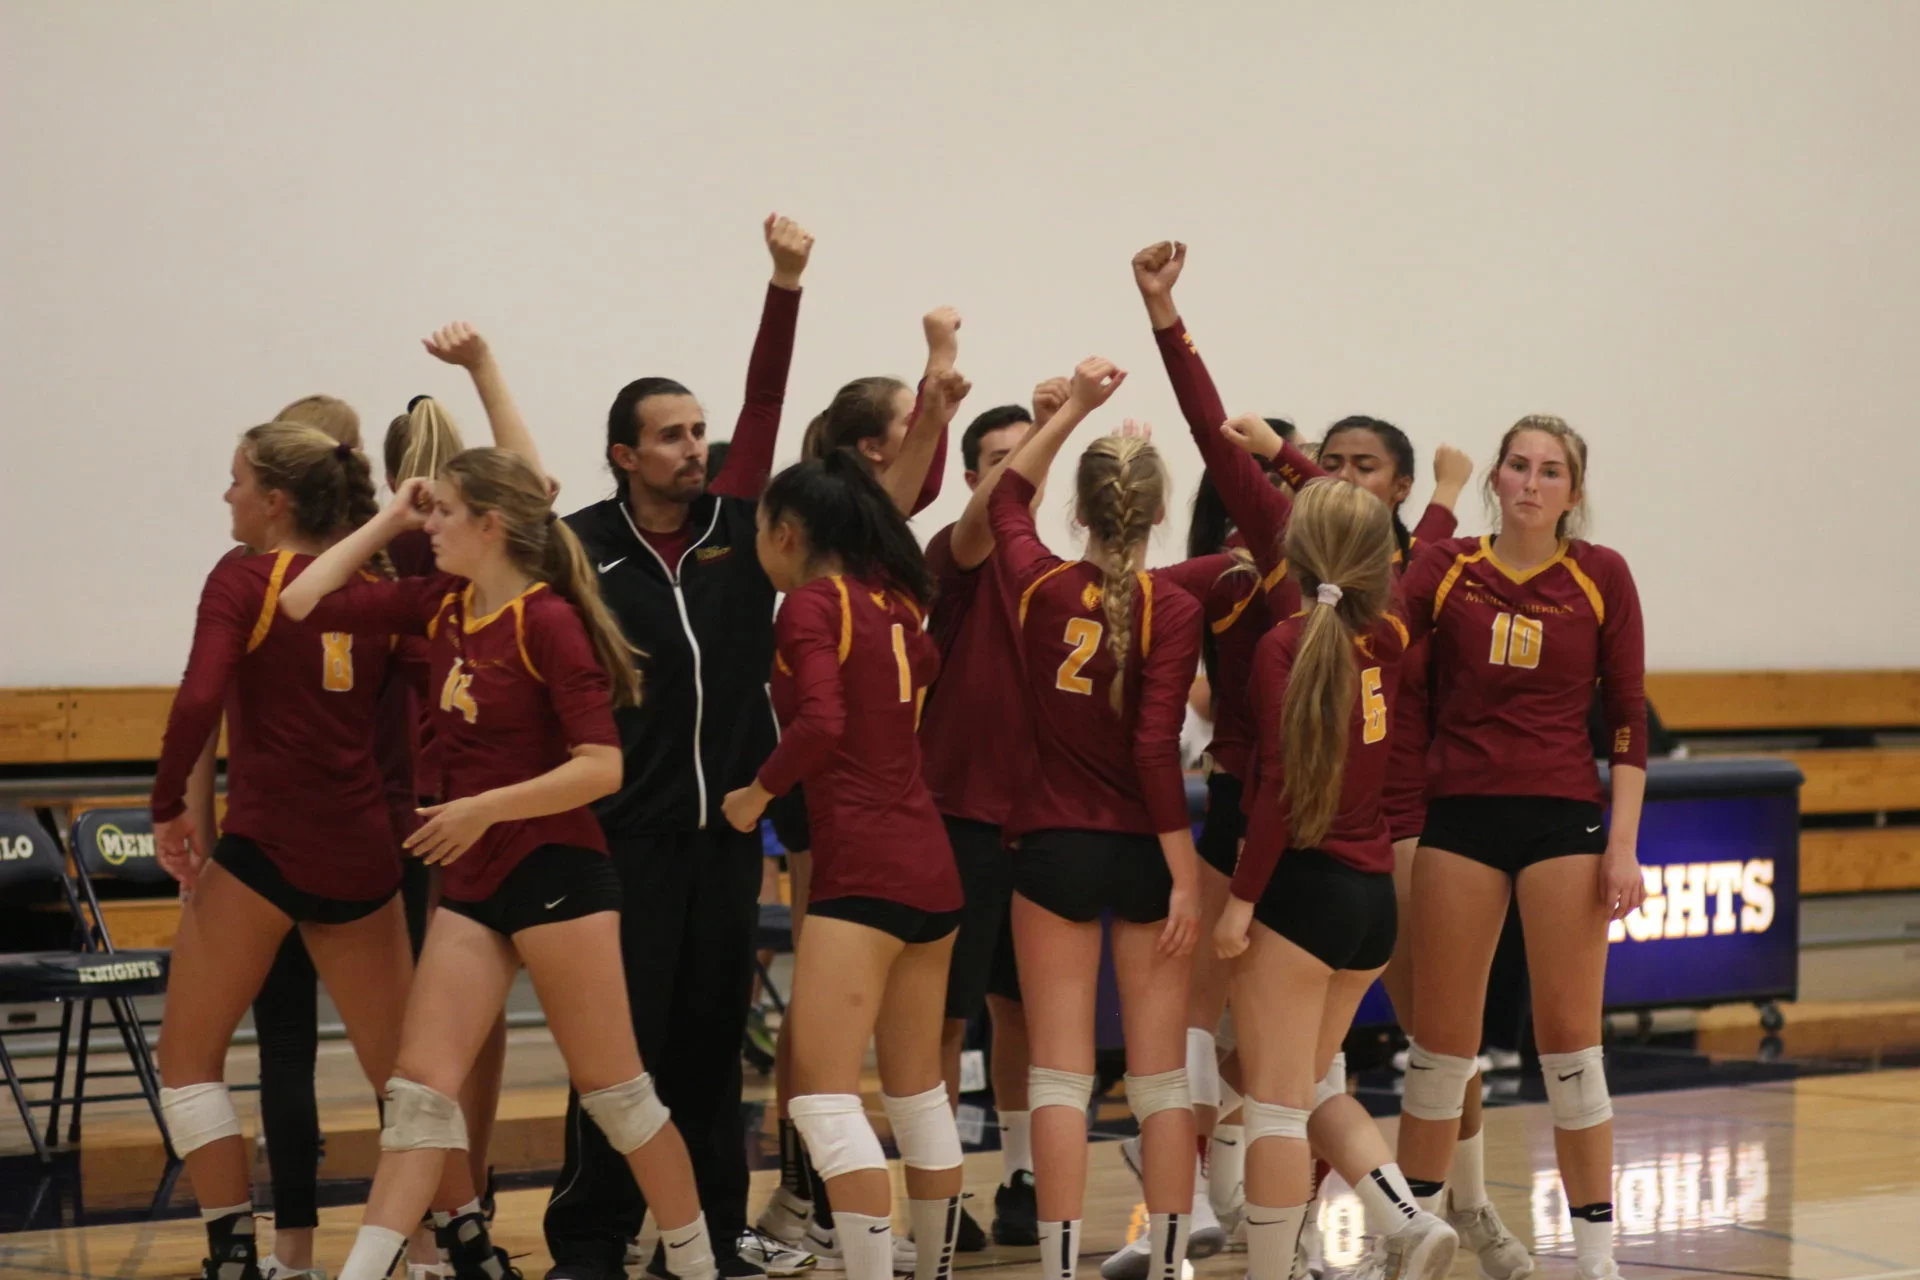 Girls volleyball looks for playoff run after tough PAL season